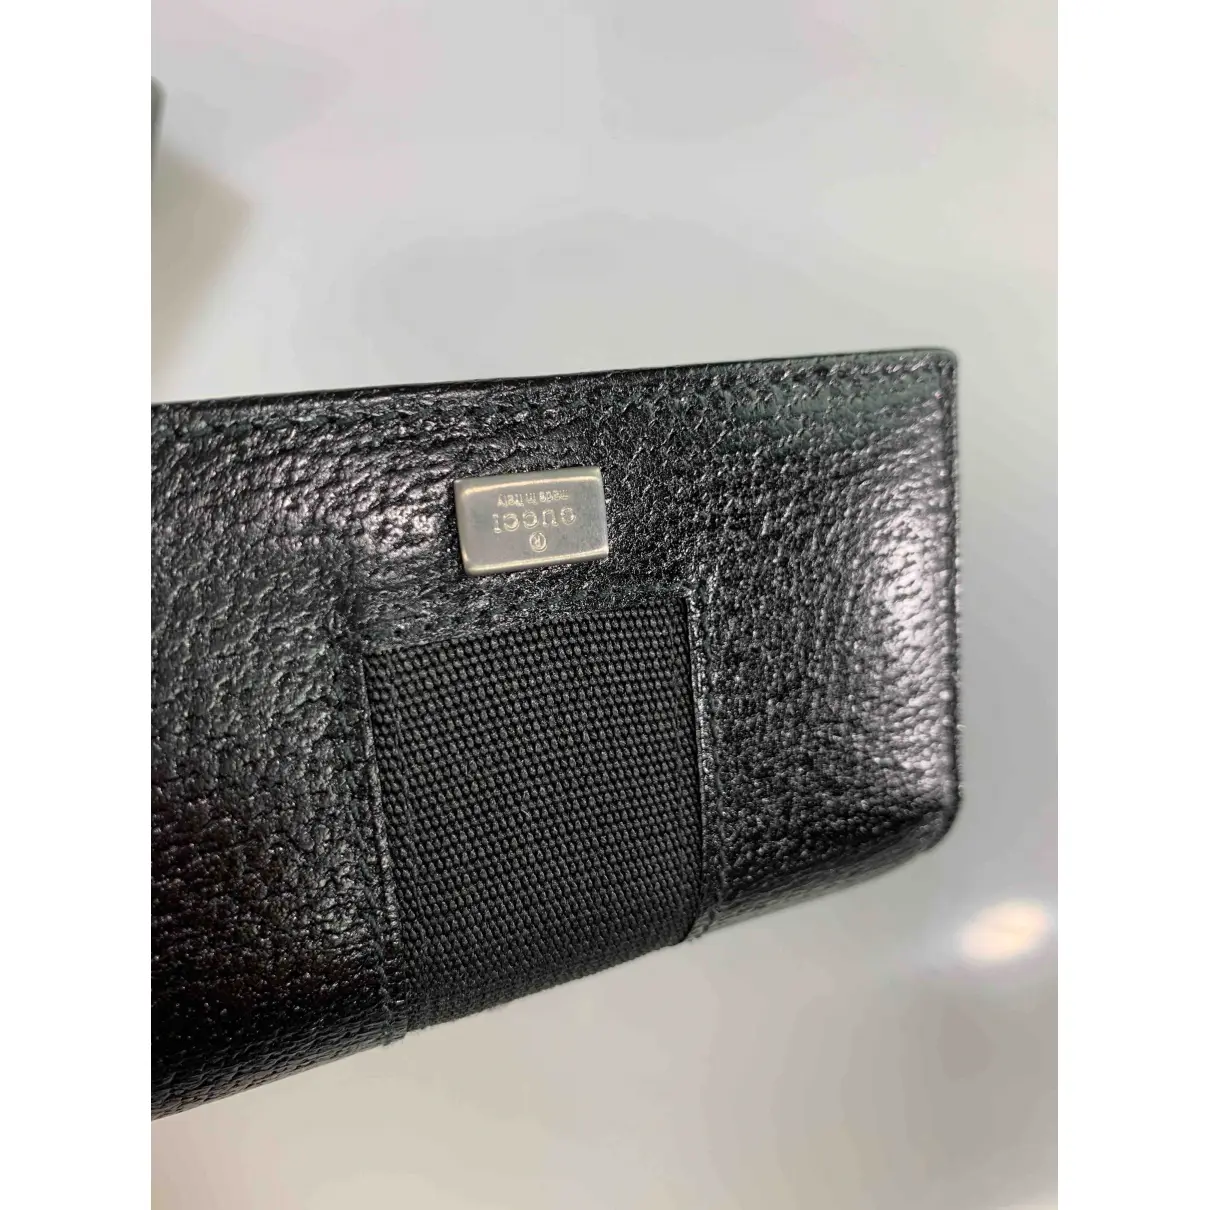 Buy Gucci Leather small bag online